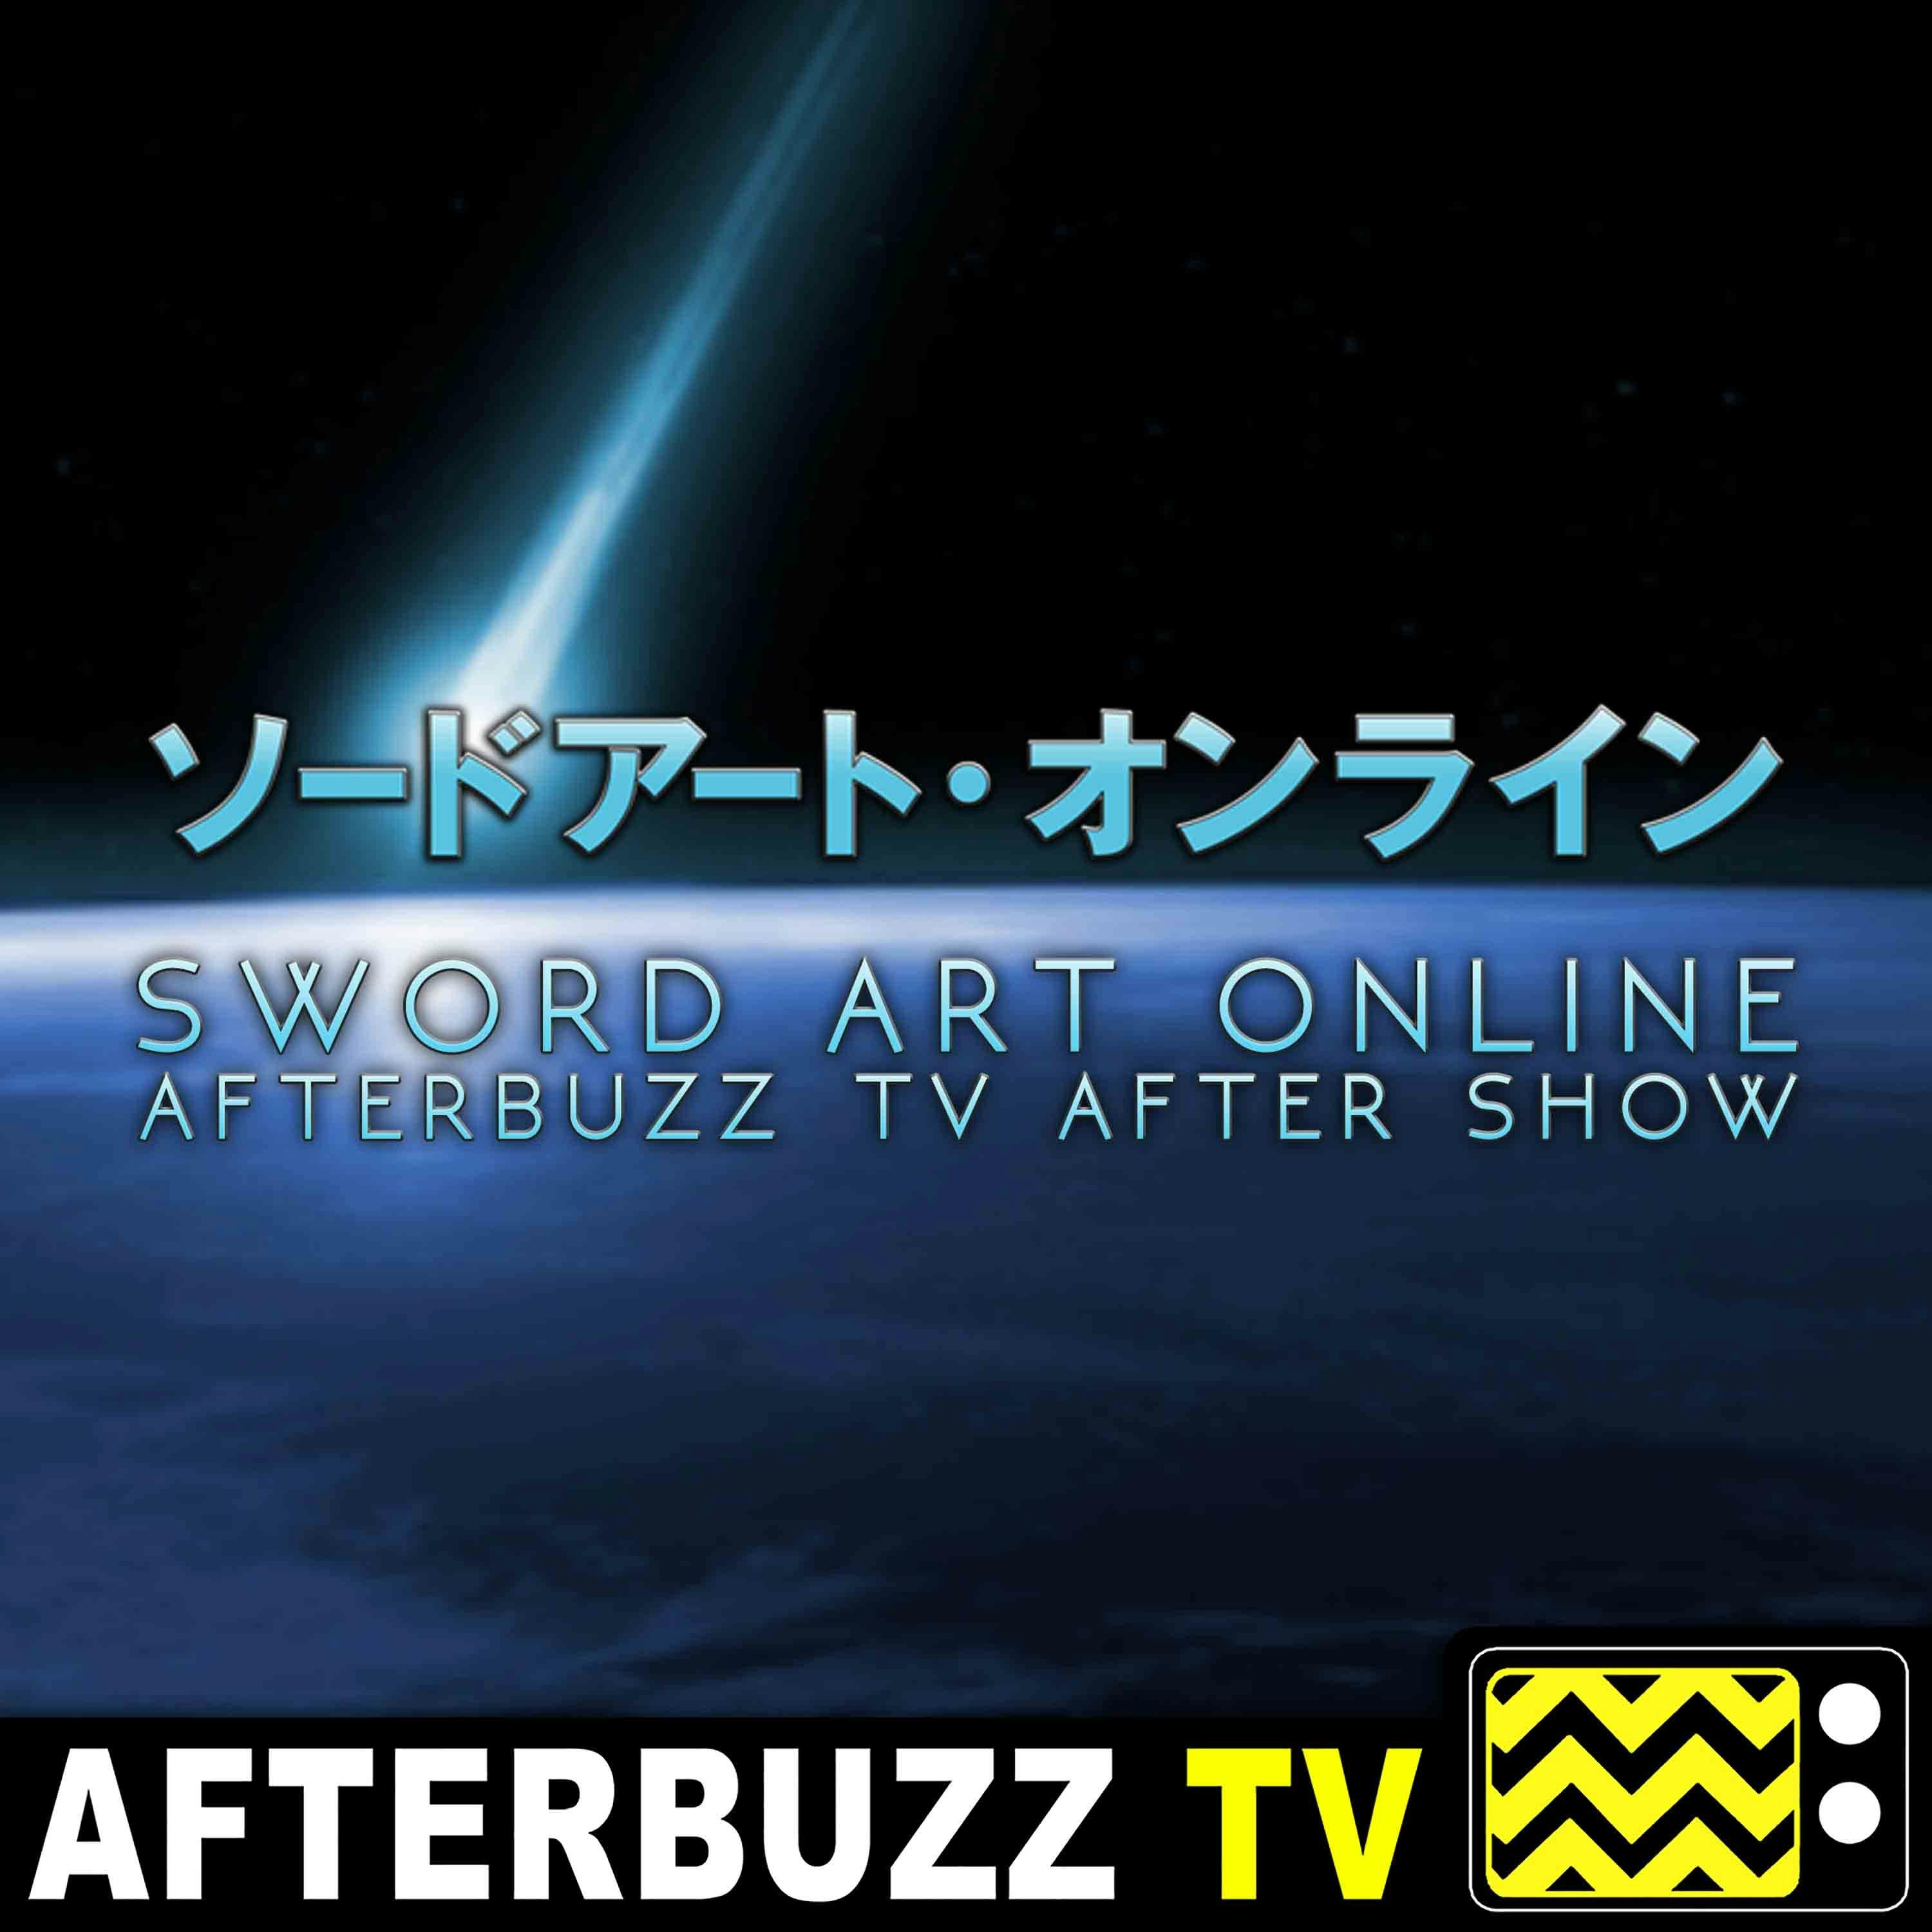 Sword Art Online S:2 | Joshua Tomar Guests on Debriefing; The King Of The Giants E:15 & E:16 | AfterBuzz TV AfterShow